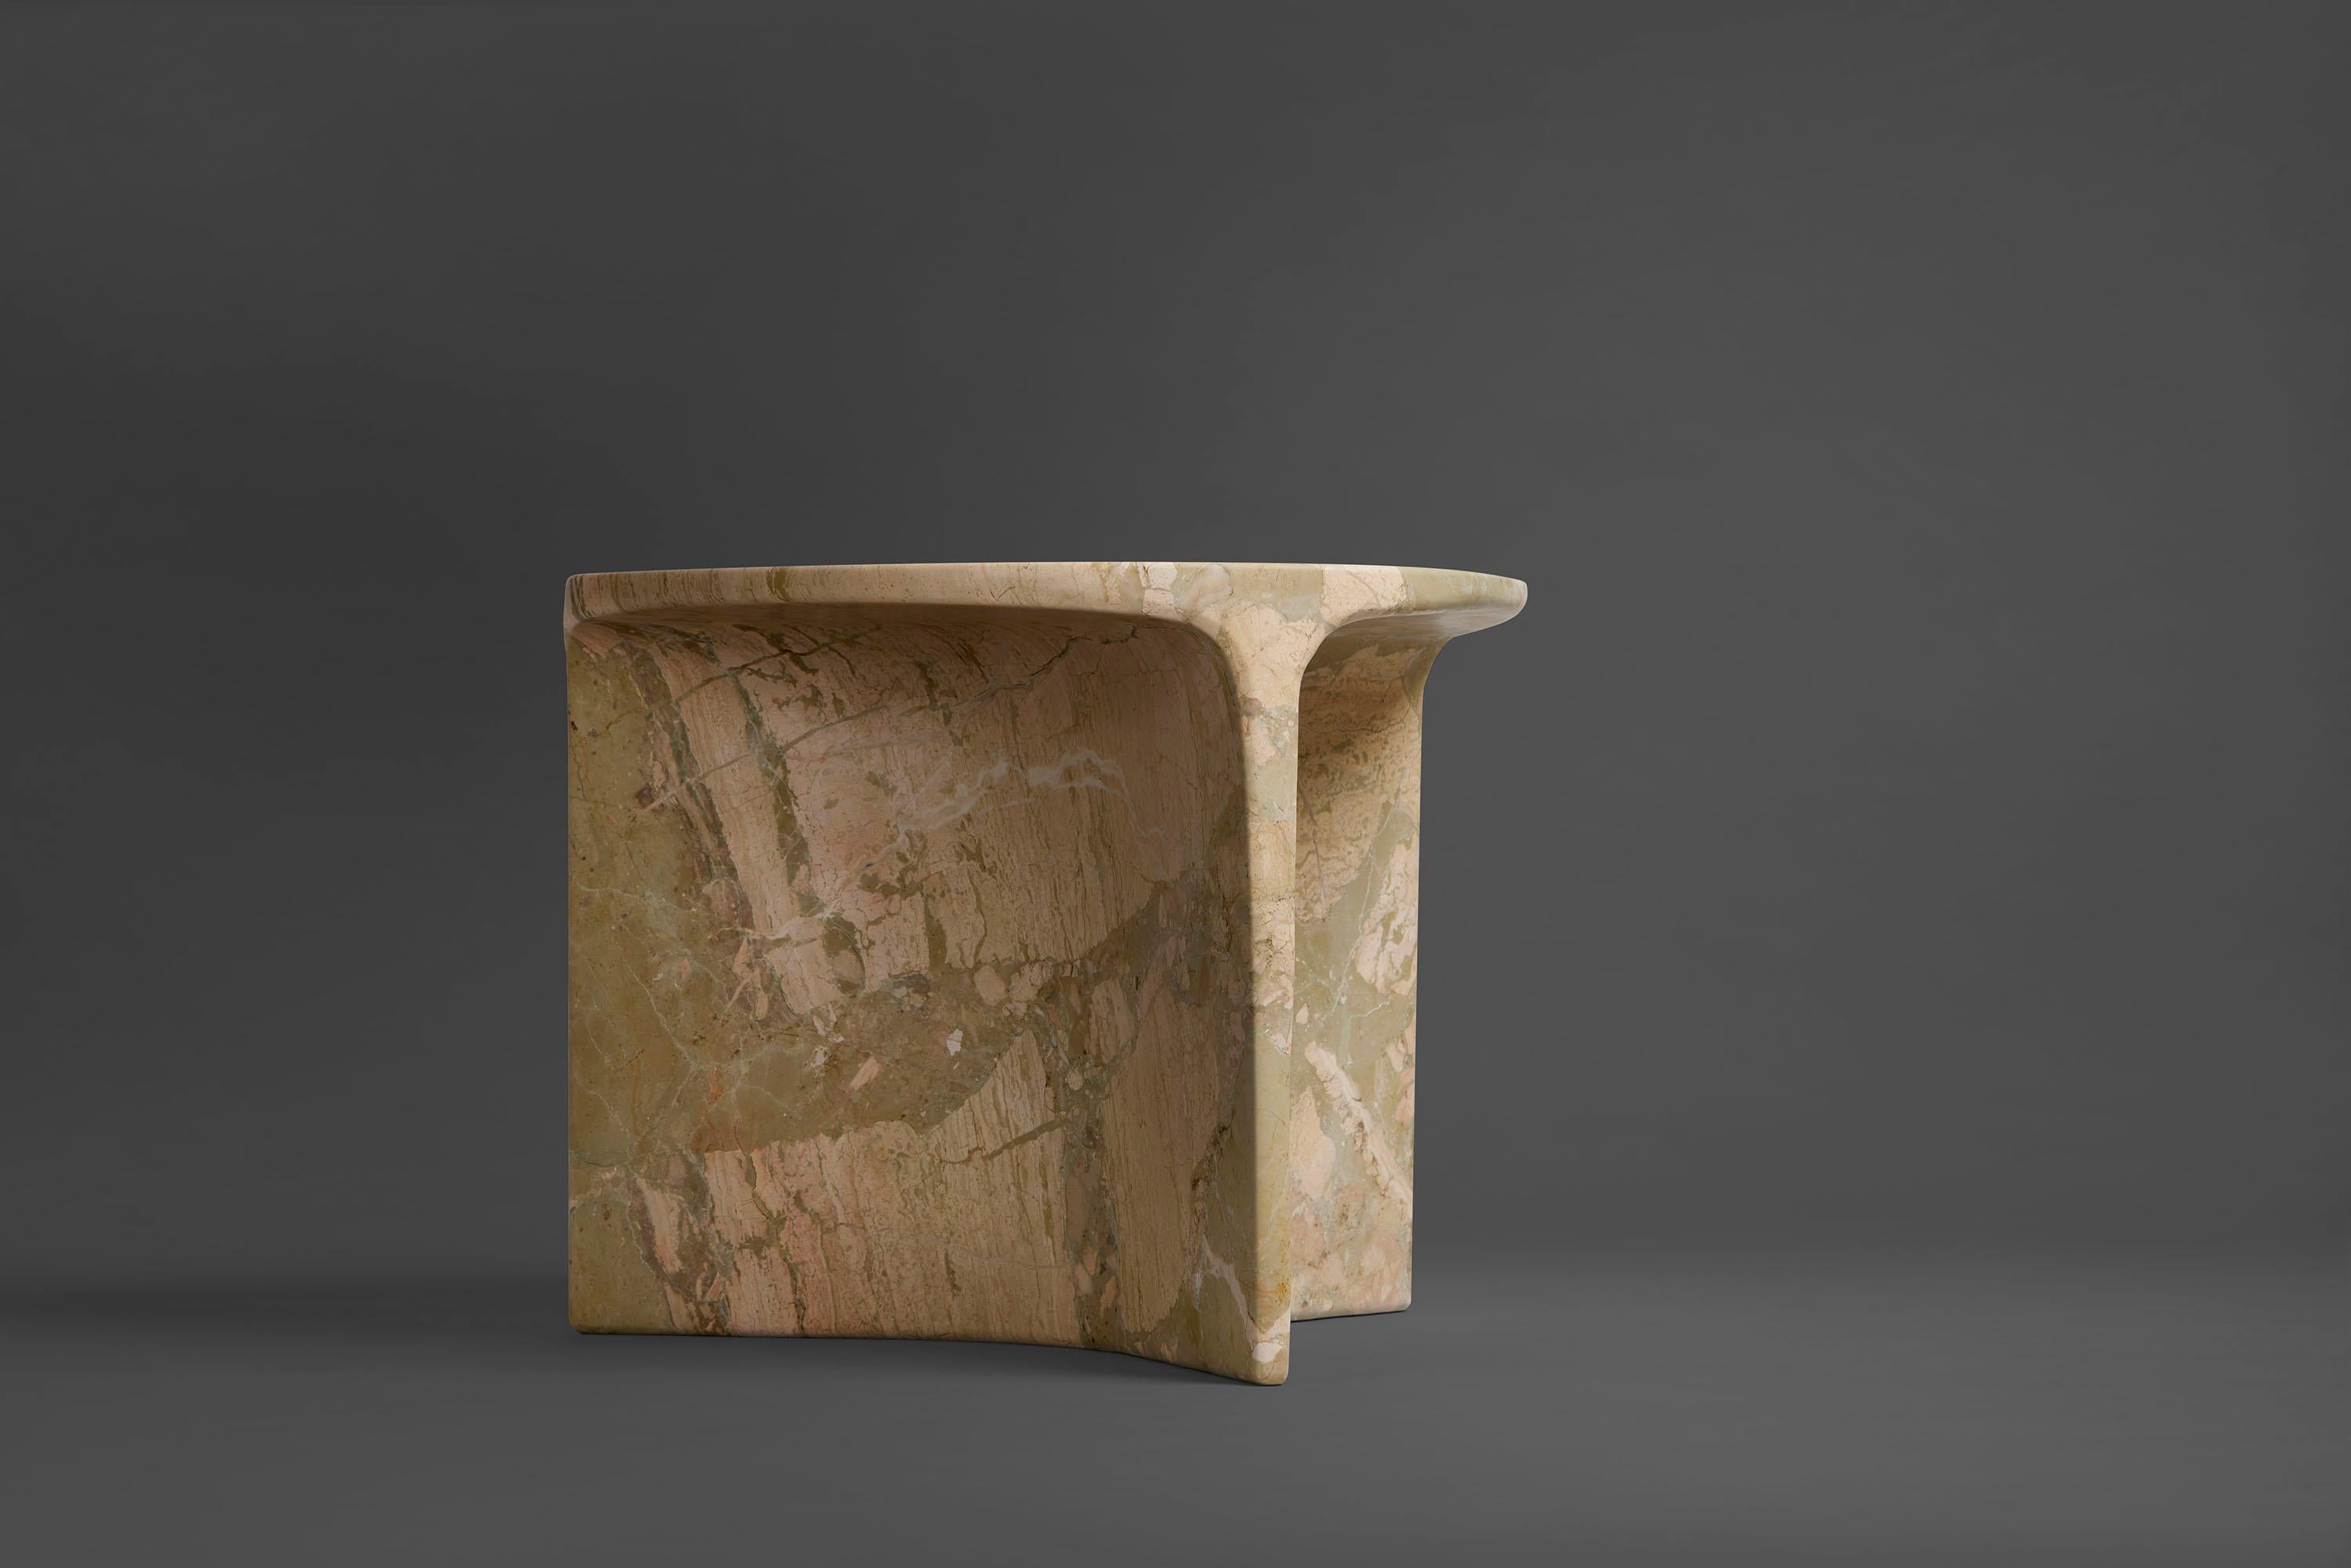 Carv occasional table is Cut from a single block of Italian Ceppo Monet marble.
Essential and organic design, naturally creating a flat tabletop flowing
to a Y - shaped foot, revealing the stone’s veins
from the exterior surface through to it’s